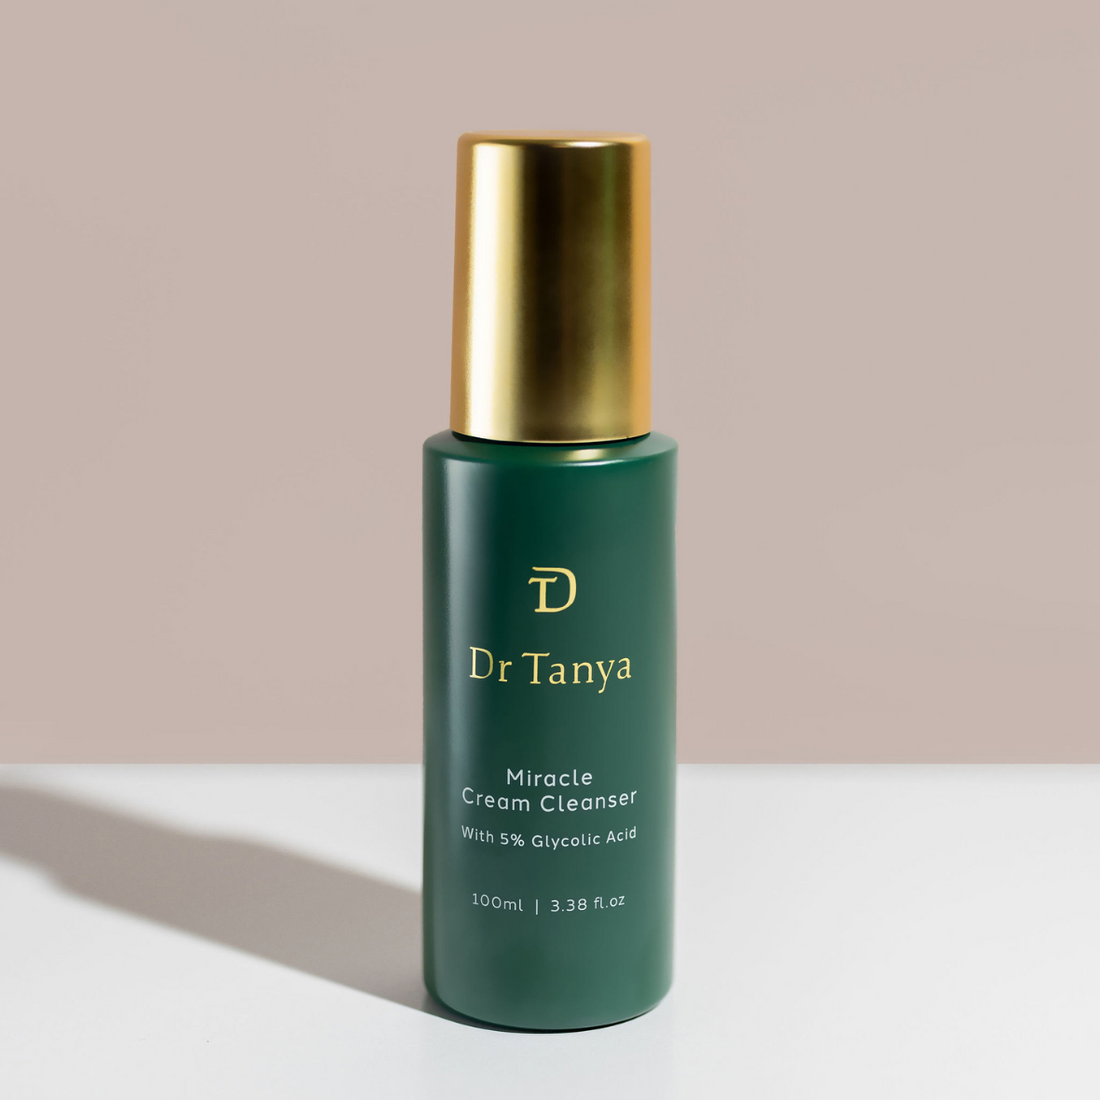 A green and gold bottle of Dr Tanya&